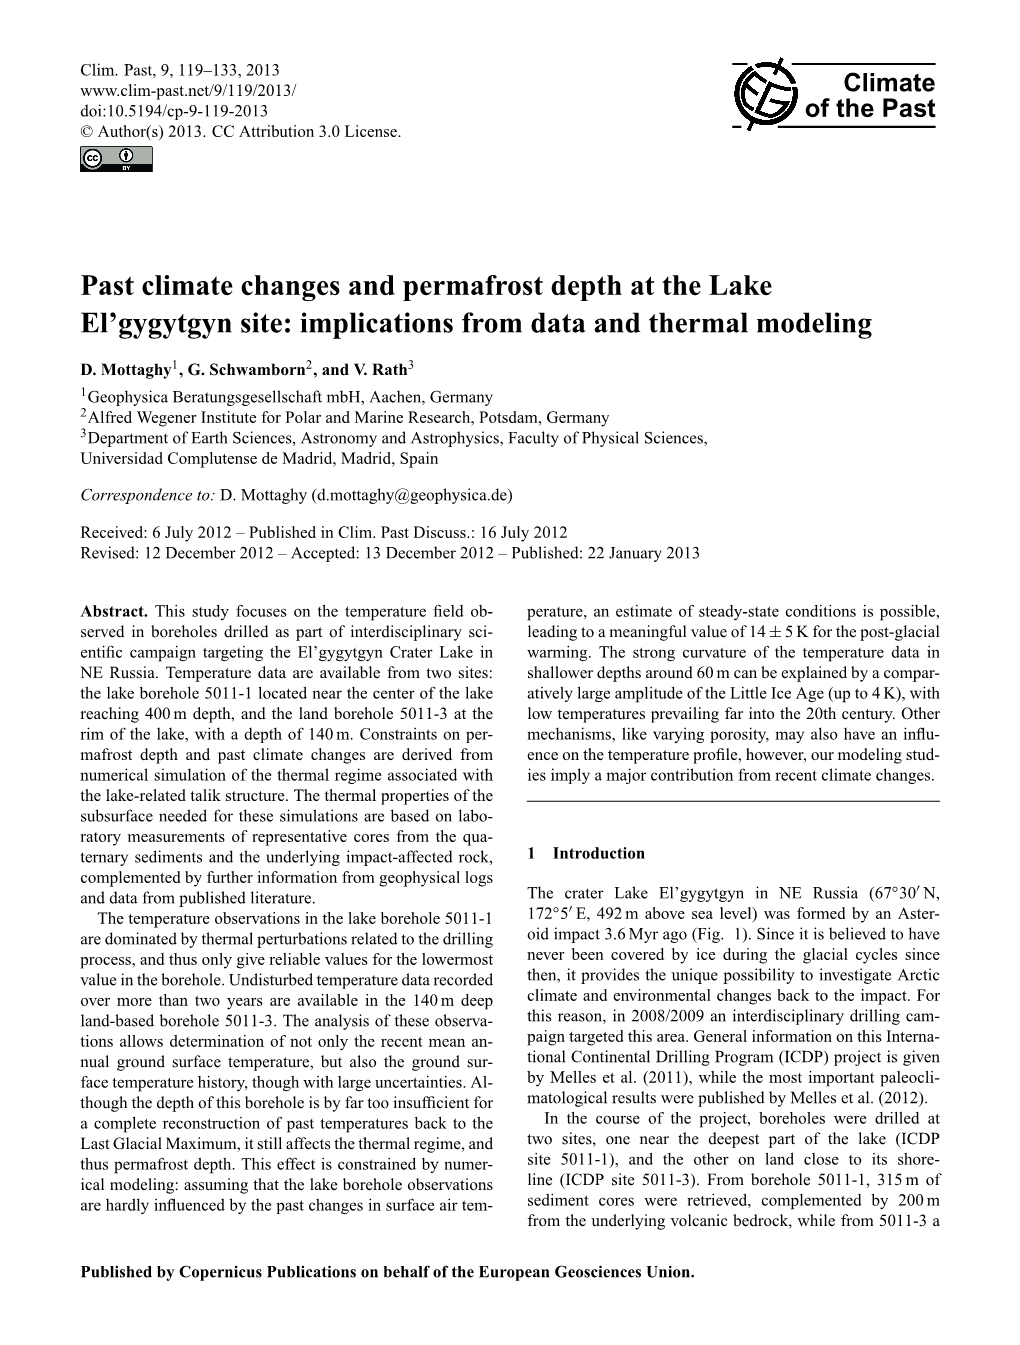 Past Climate Changes and Permafrost Depth at the Lake El'gygytgyn Site: Implications from Data and Thermal Modeling